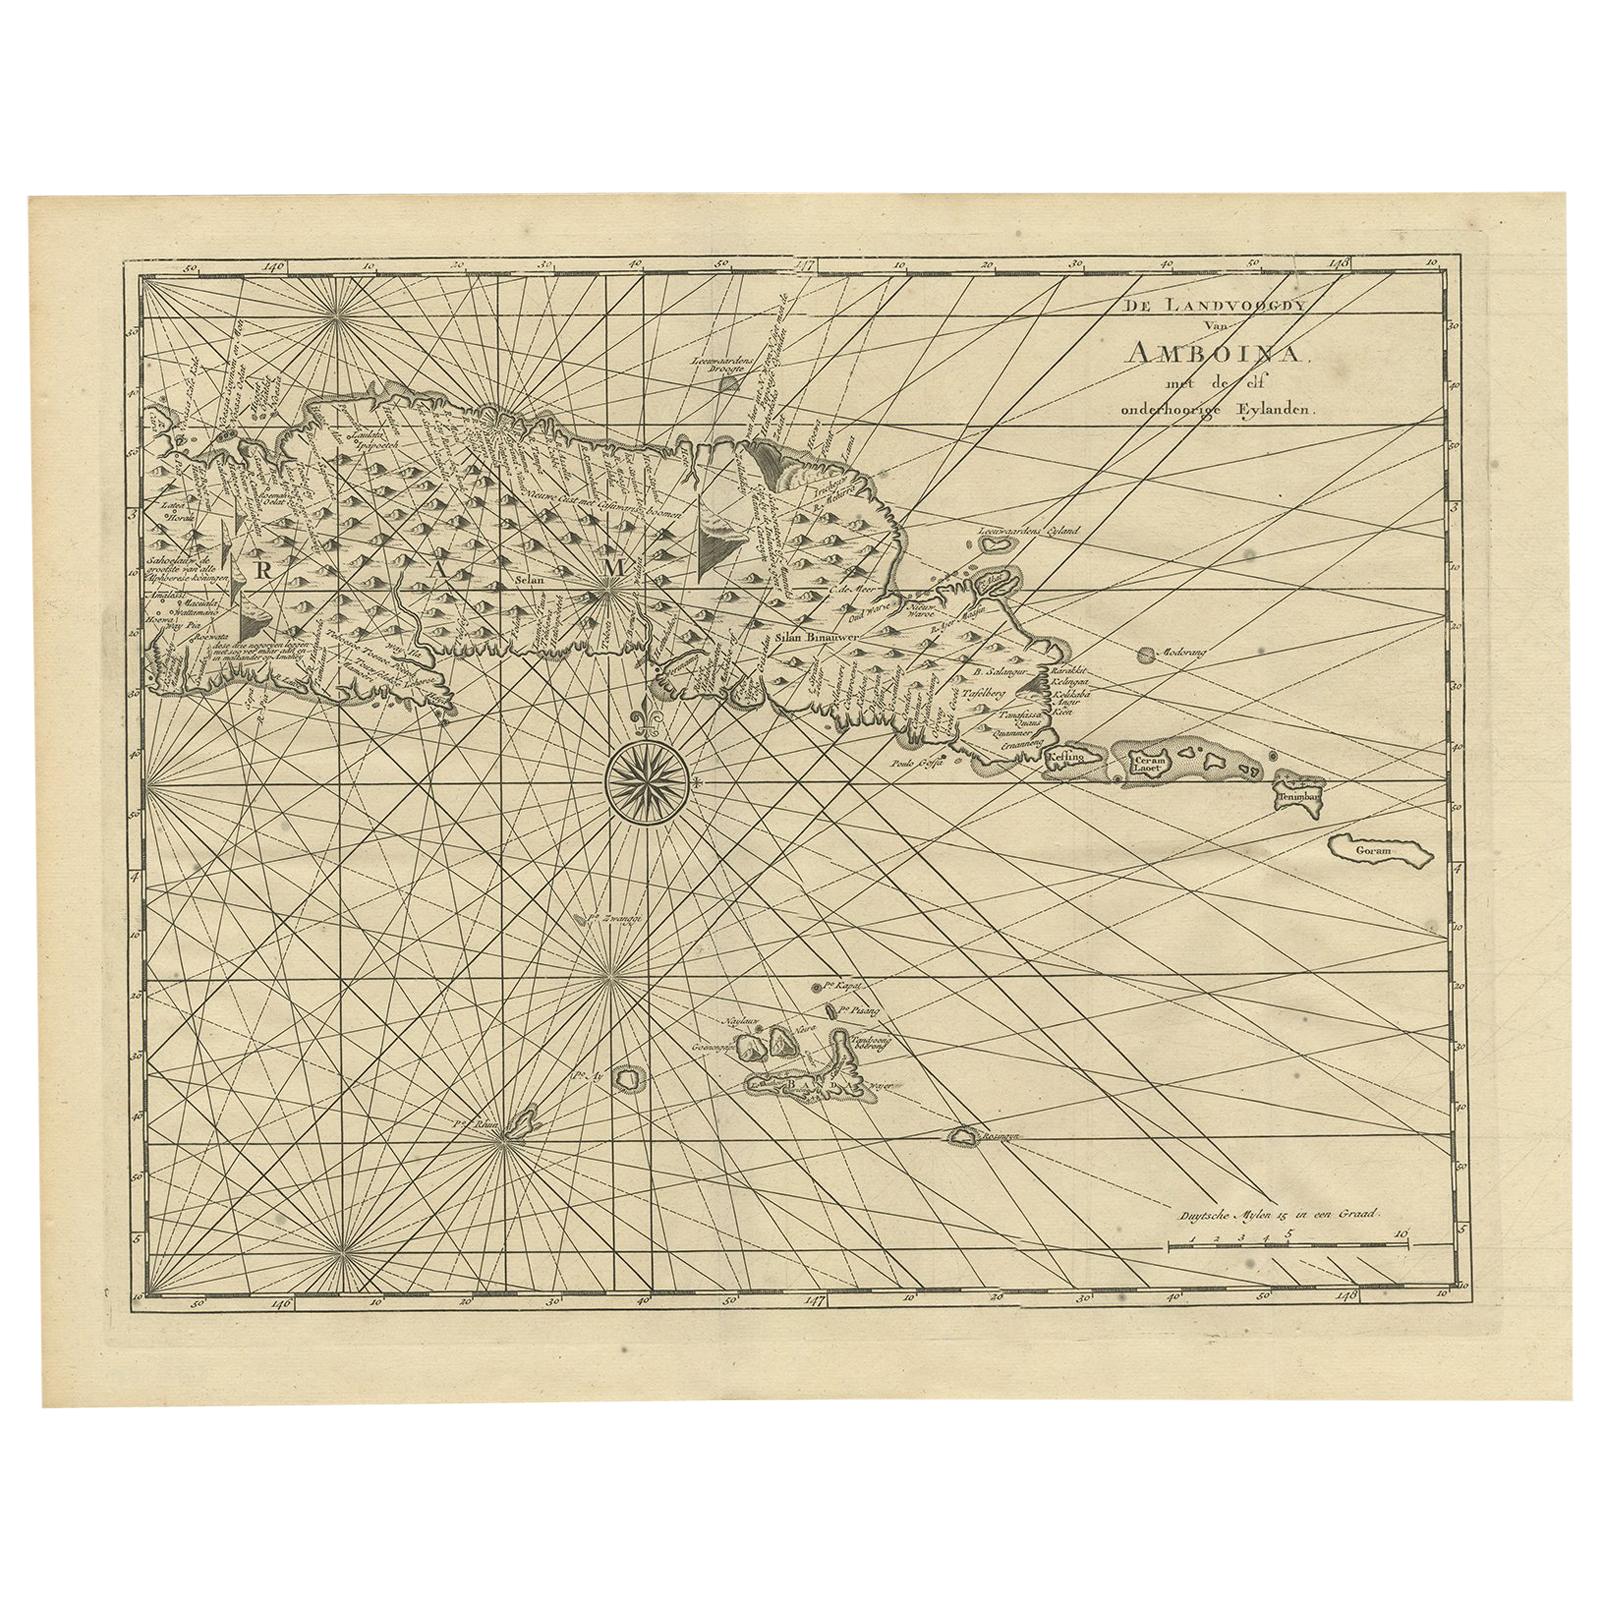 Antique Map of Ambon and Surroundings by Valentijn '1726' For Sale